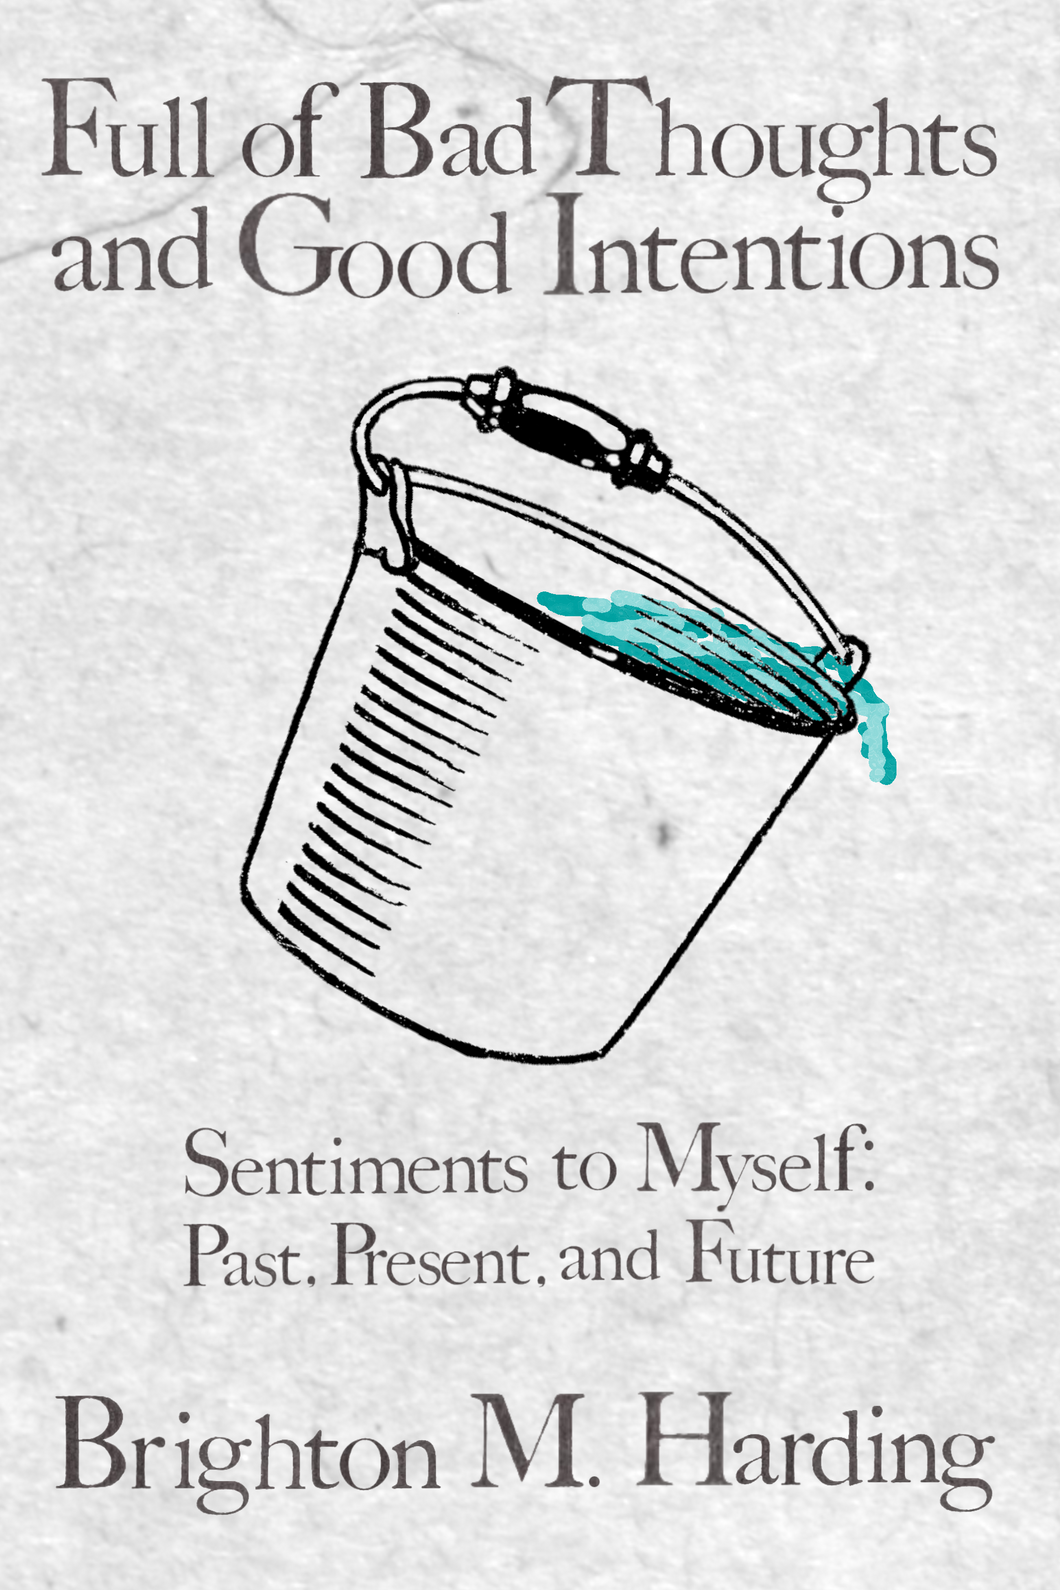 Full of Bad Thoughts and Good Intentions: Sentiments to Myself: Past, Present, and Future, by Brighton M. Harding-Print Books-Bottlecap Press